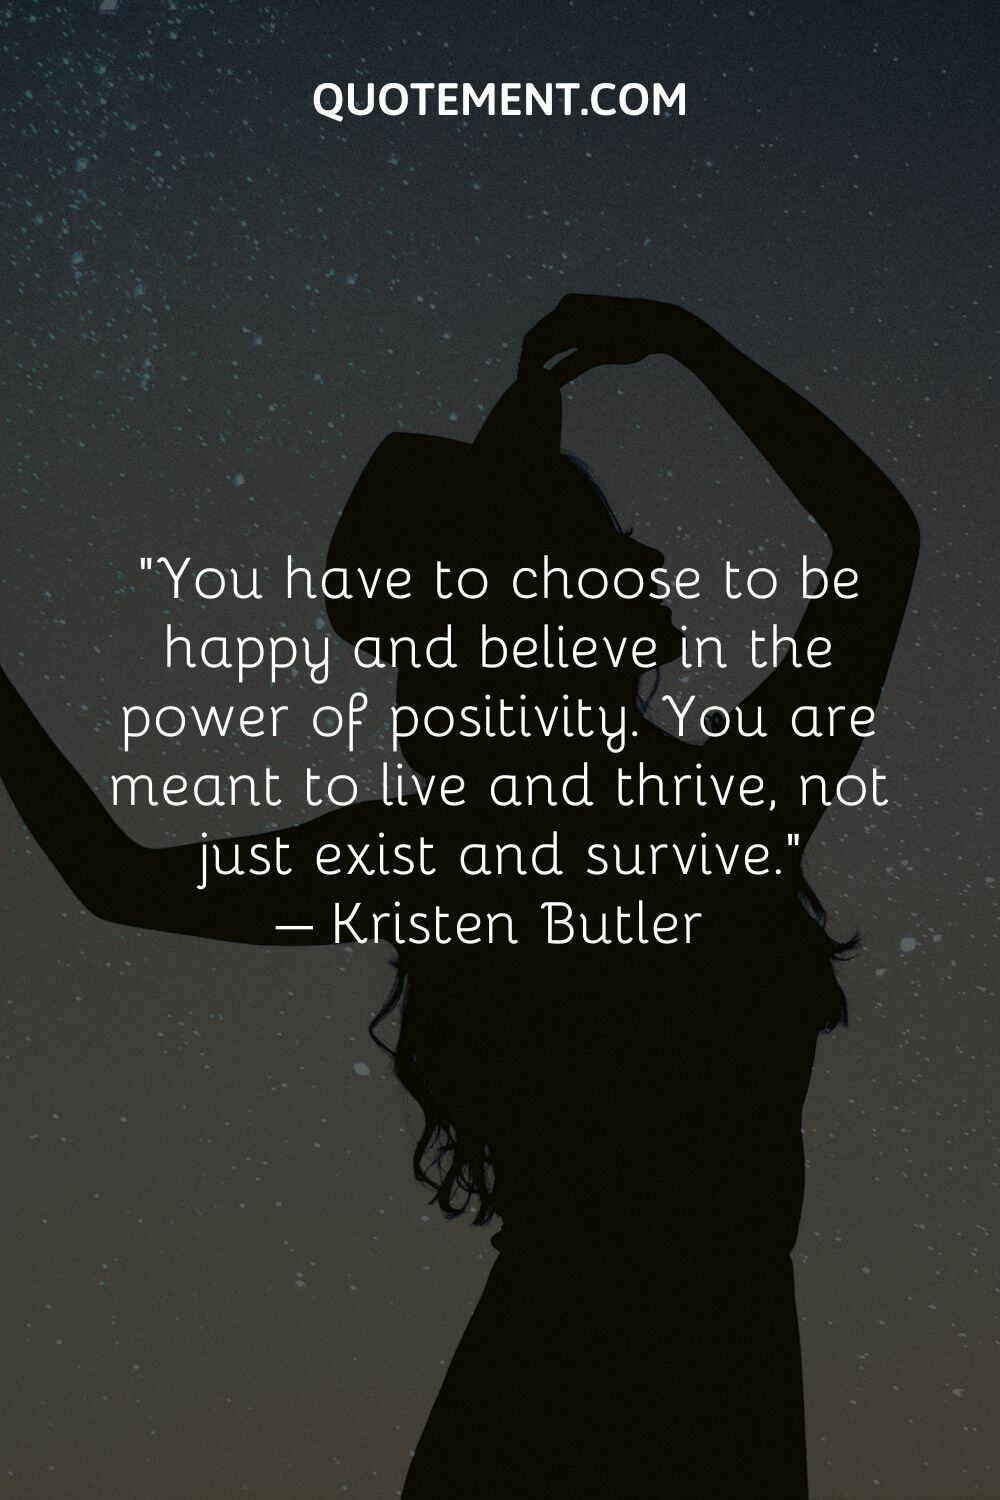 You have to choose to be happy and believe in the power of positivity.